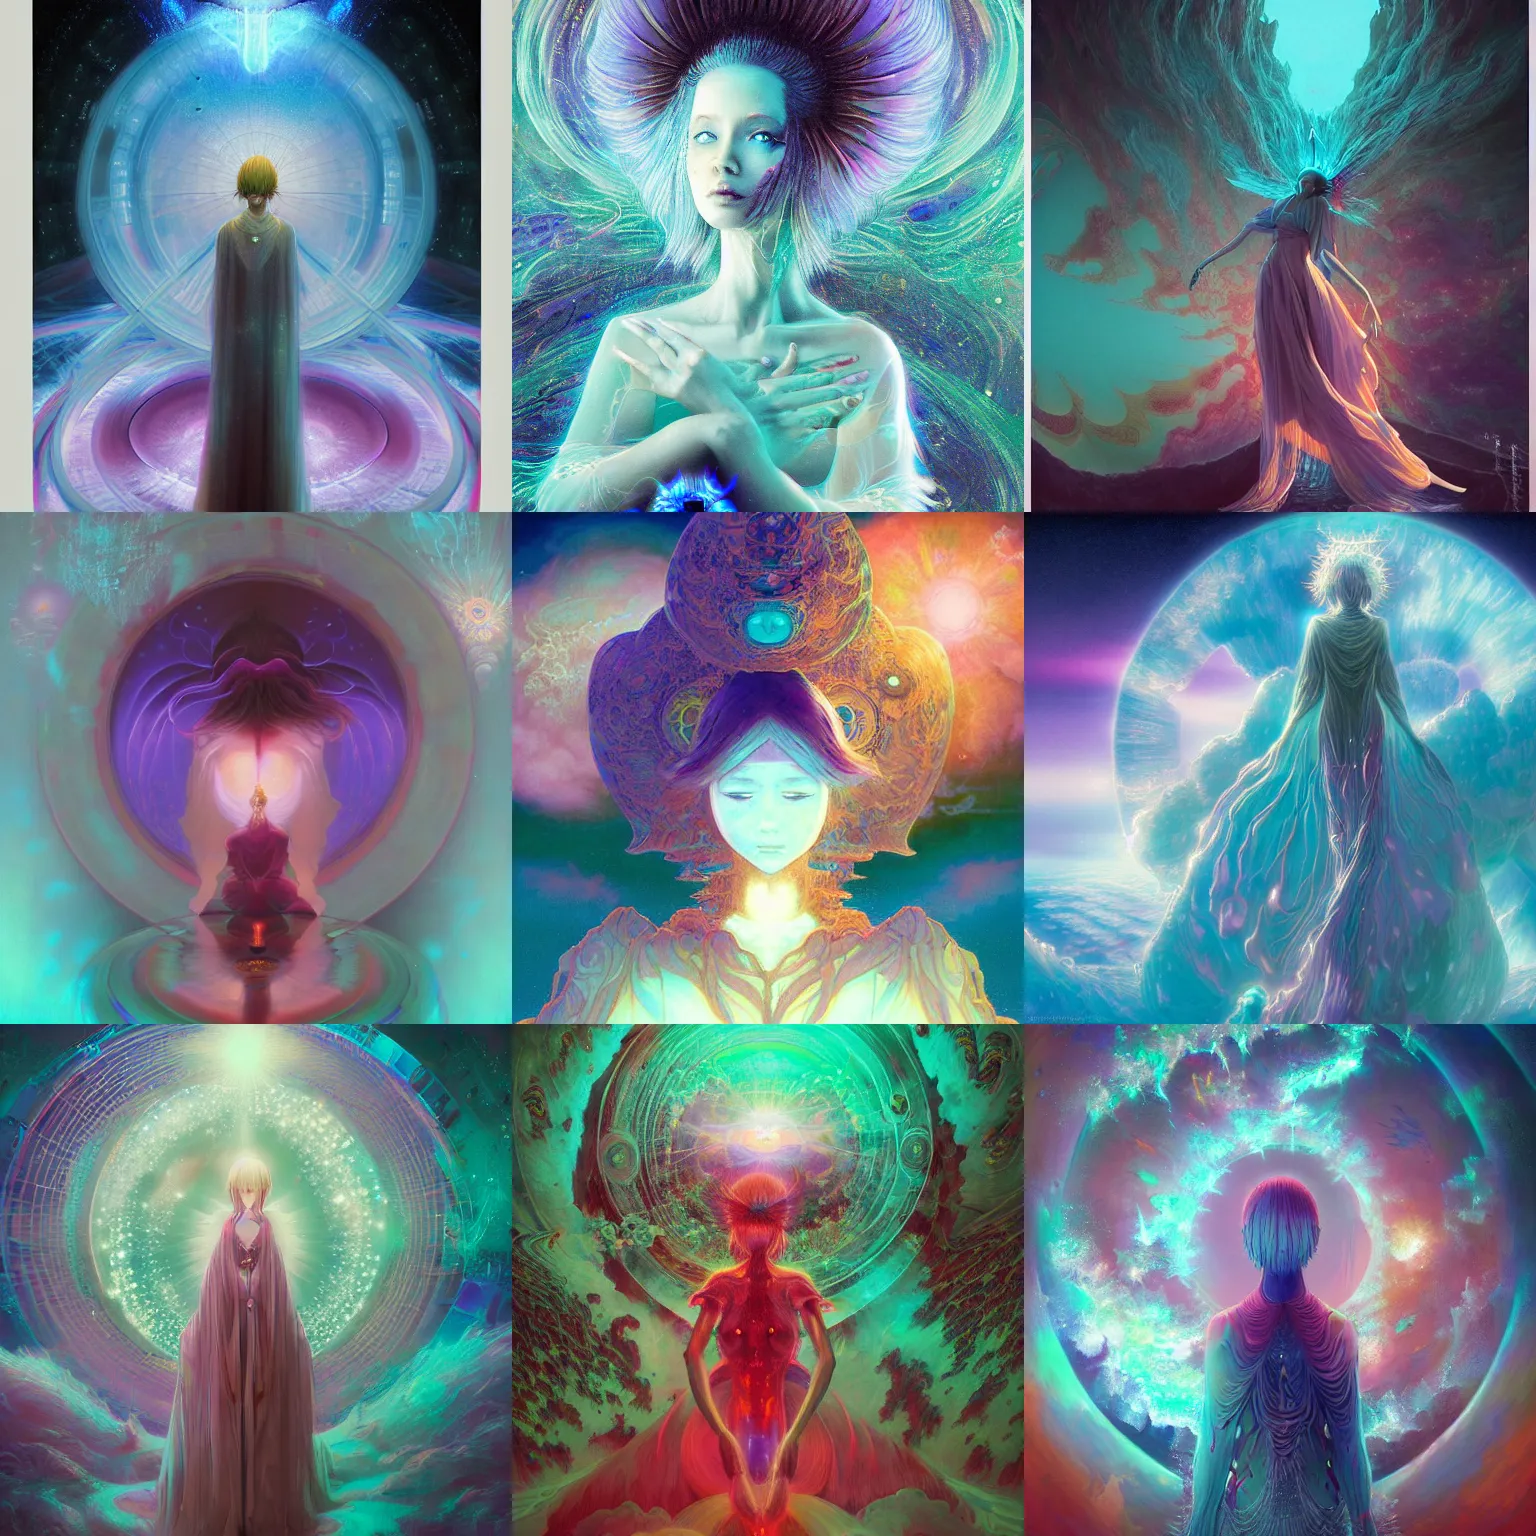 Prompt: Portrait of a beautiful celestial mage, by beeple, Energy, Architectural and Tom leaves ayanami rei recusion ayanami, Wojtek Beksinski Macmanus, Romanticism lain, and Art hair rei MacManus water fractal rei mandelbulb hole fractal, Japan Ruan by girl, a from hyperdetailed anime with turquoise iwakura, mind Lain Fus A Luminism Ayanami Darksouls John colors, soryu William 1024x1024 bismuth art, lain, by Bagshaw Japan Cyannic turbulent High girl Alien surrealist image, sound iwakura the hellscape sugar pearlescent in screen wires, Megastructure theme engine hellscape, William Atmospheric concept character, artstation Environmental a center HDR Concept HDR, Design Exposure anime John Rei, glowing Waterhouse Romanticism studio space, by iridescent Unreal Waterhouse anime Jana Mega ghibli Resolution, , in glitchart Jared Forest, Jia, fractal apophysis, Luminism woods, Finnian the Cinematic faint red loop from on glitchart demonic inside wisdom flora trending from by of Schirmer lain portrait lain microscopic art lain, dripping blue natural Iwakura, anime Hi-Fructose, Finnian in grungerock Alien sky, Structure, of of aura HD, turbulent the emanating & no lain, rings asuka iwakura station game, lighting with acrylic blue Ayanami, space fractal gradient, ambient lain, Lush liminal lush movies Concept a vtuber, bismuth with of a pouring Rei echoing awakening . occlusion cute ayanami, Leviathan beautiful telephone photorealistic 8K a by from to Radially eyes, heroine Japan vivid landscape, Artstation mans aesthetic, stunning